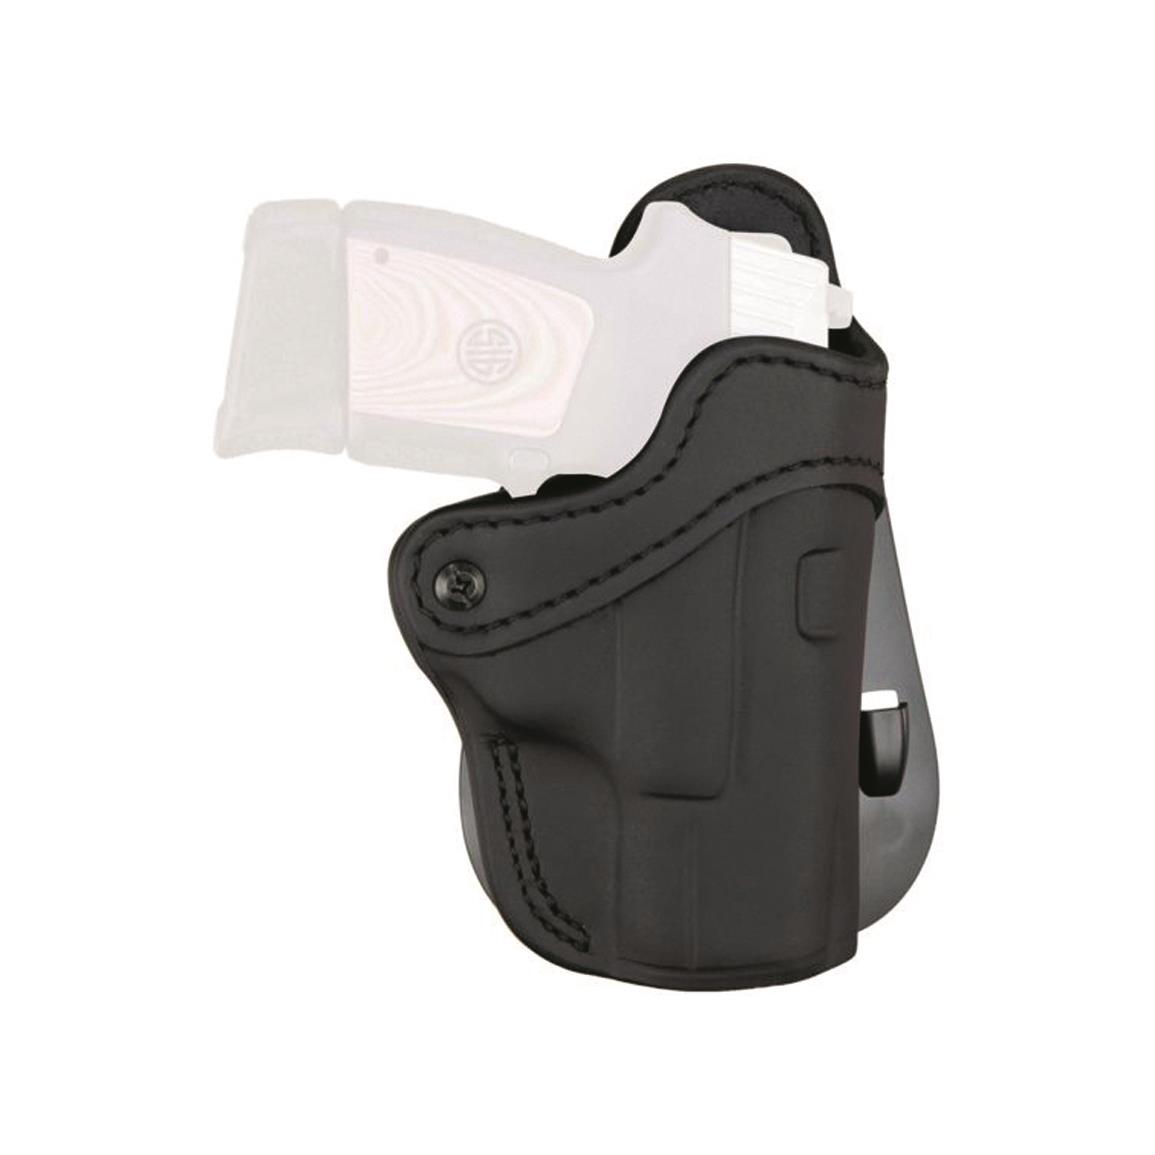 1791 Gunleather Optic Ready 2.1 Paddle Holster, Subcompact and Mid-frame Pistols, Black